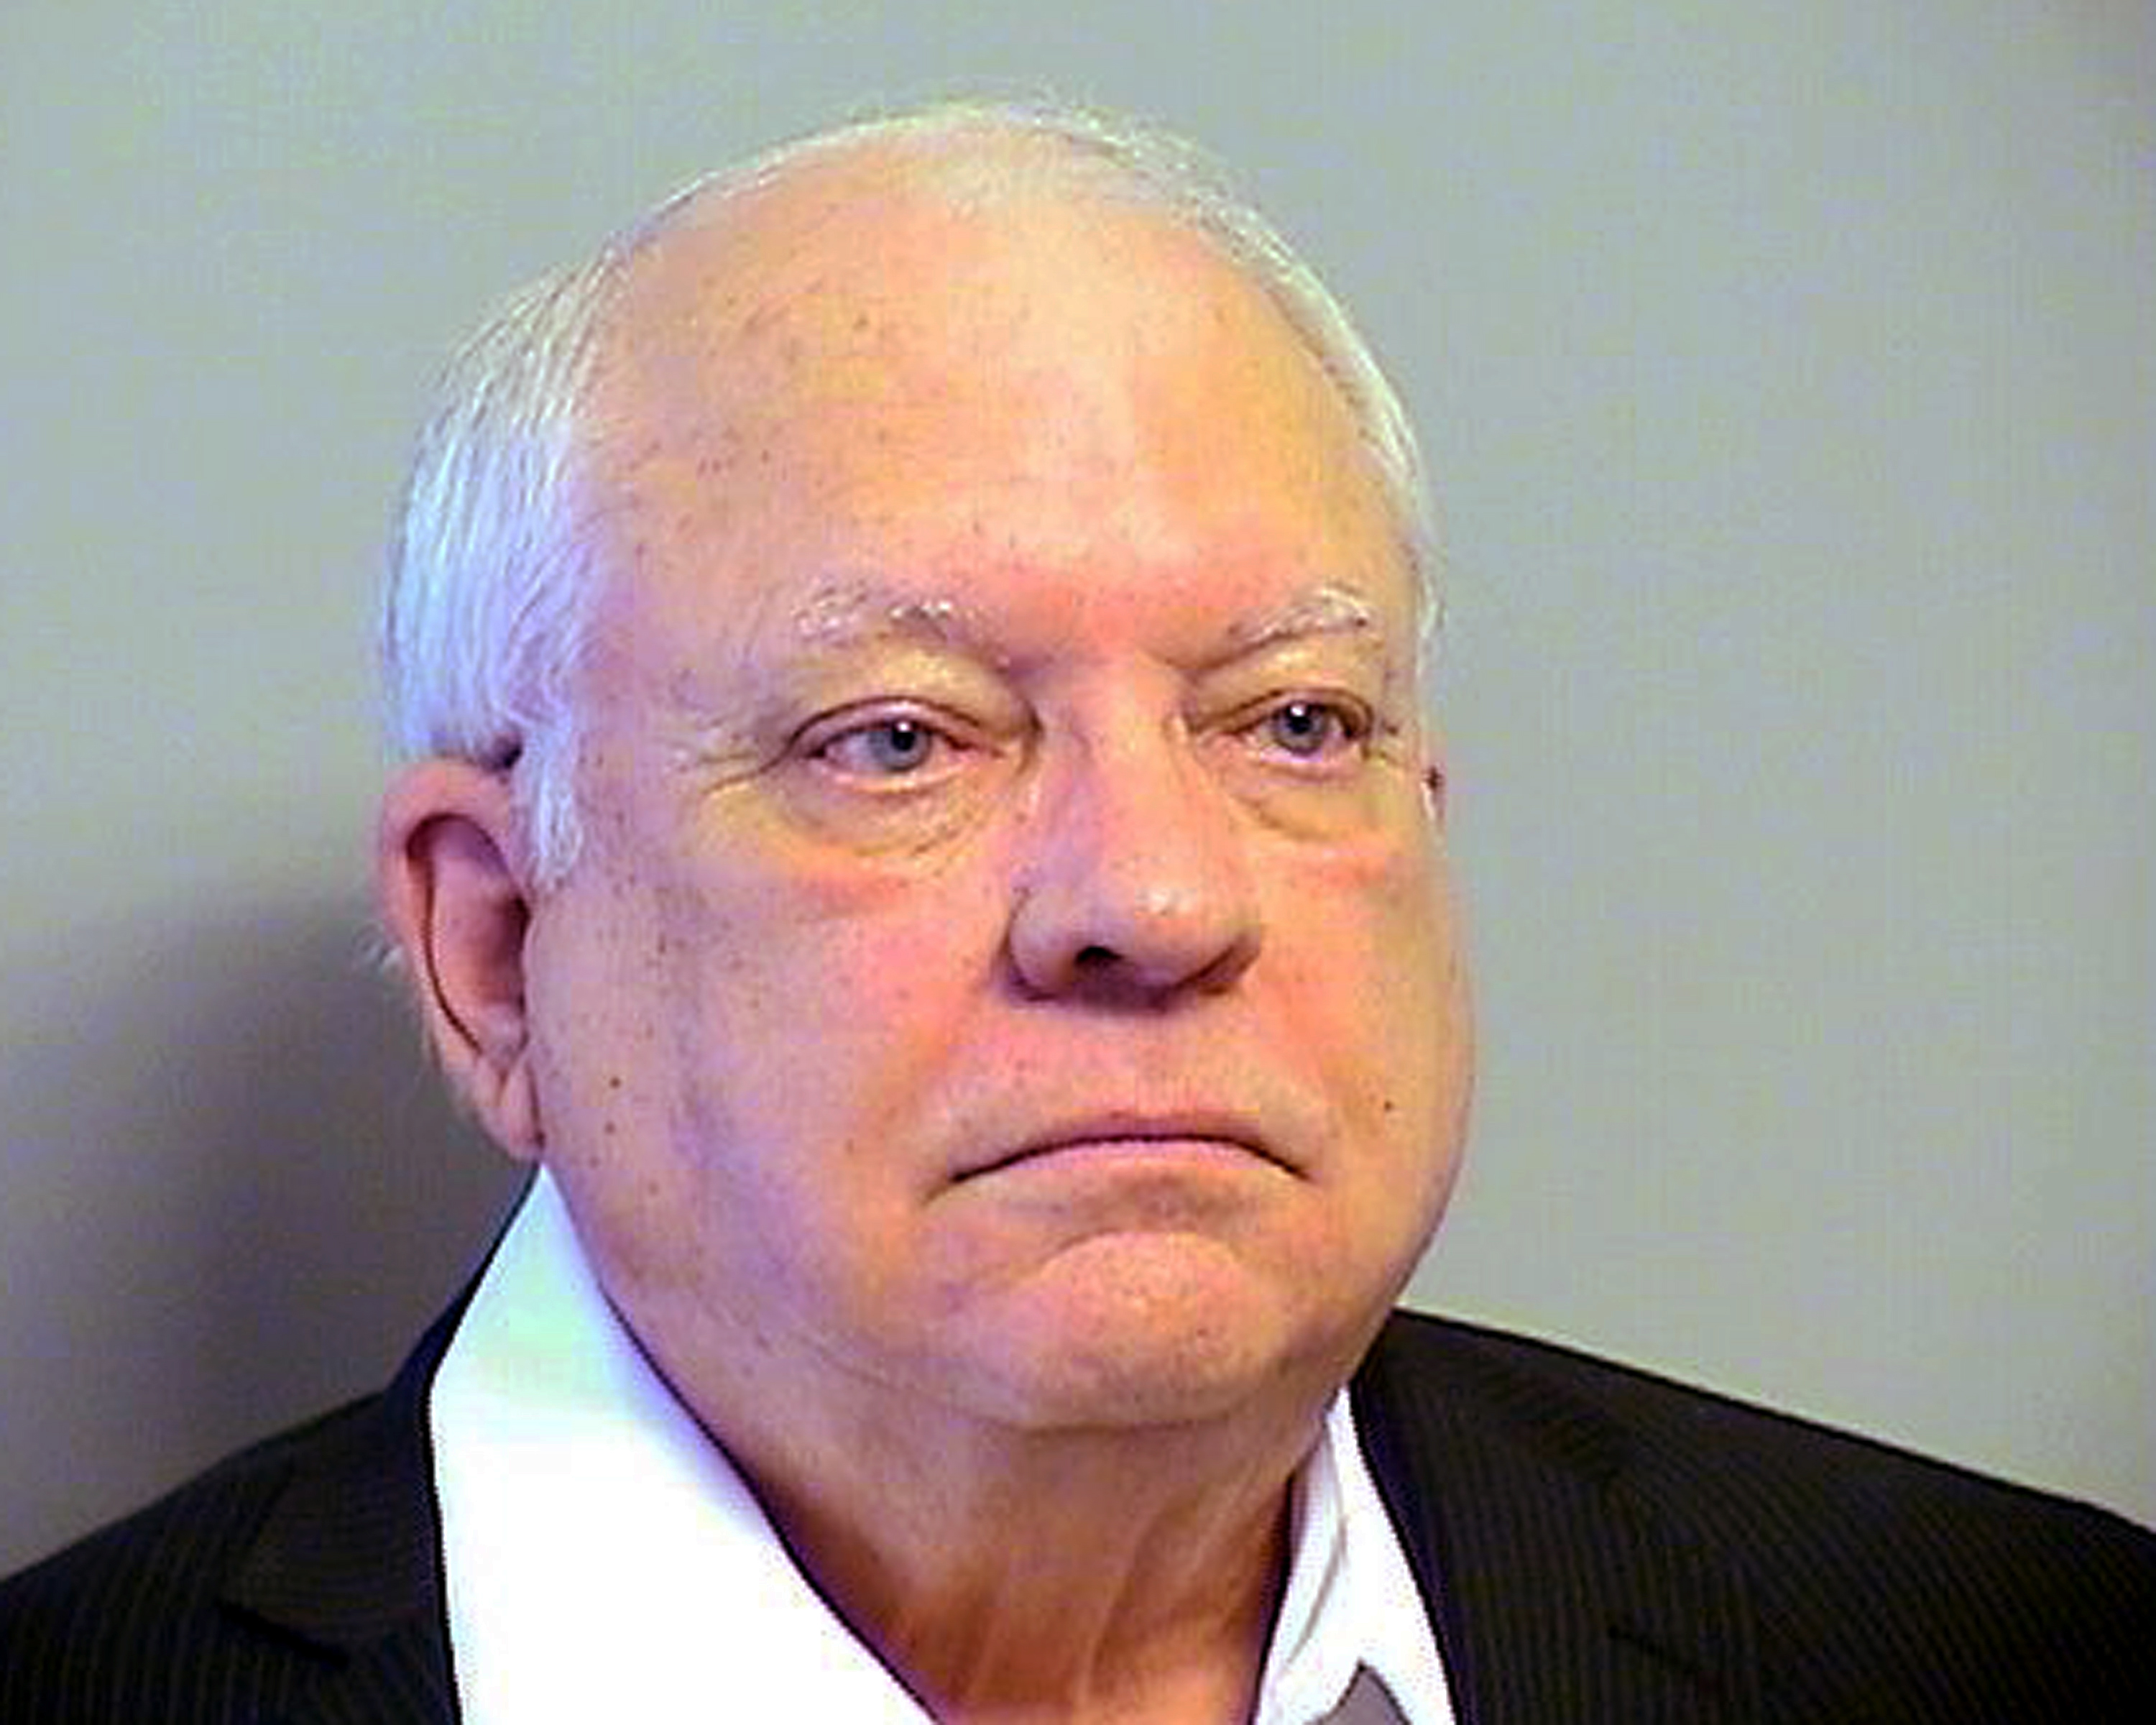 Robert Bates. The 73-year-old Oklahoma reserve sheriff's deputy, who authorities said fatally shot a suspect after confusing his stun gun and handgun, was booked into the county jail on a manslaughter charge in Tulsa, Okla. on April 14, 2015. (Tulsa County, Oklahoma, Sheriff&#039;s Office /AP)